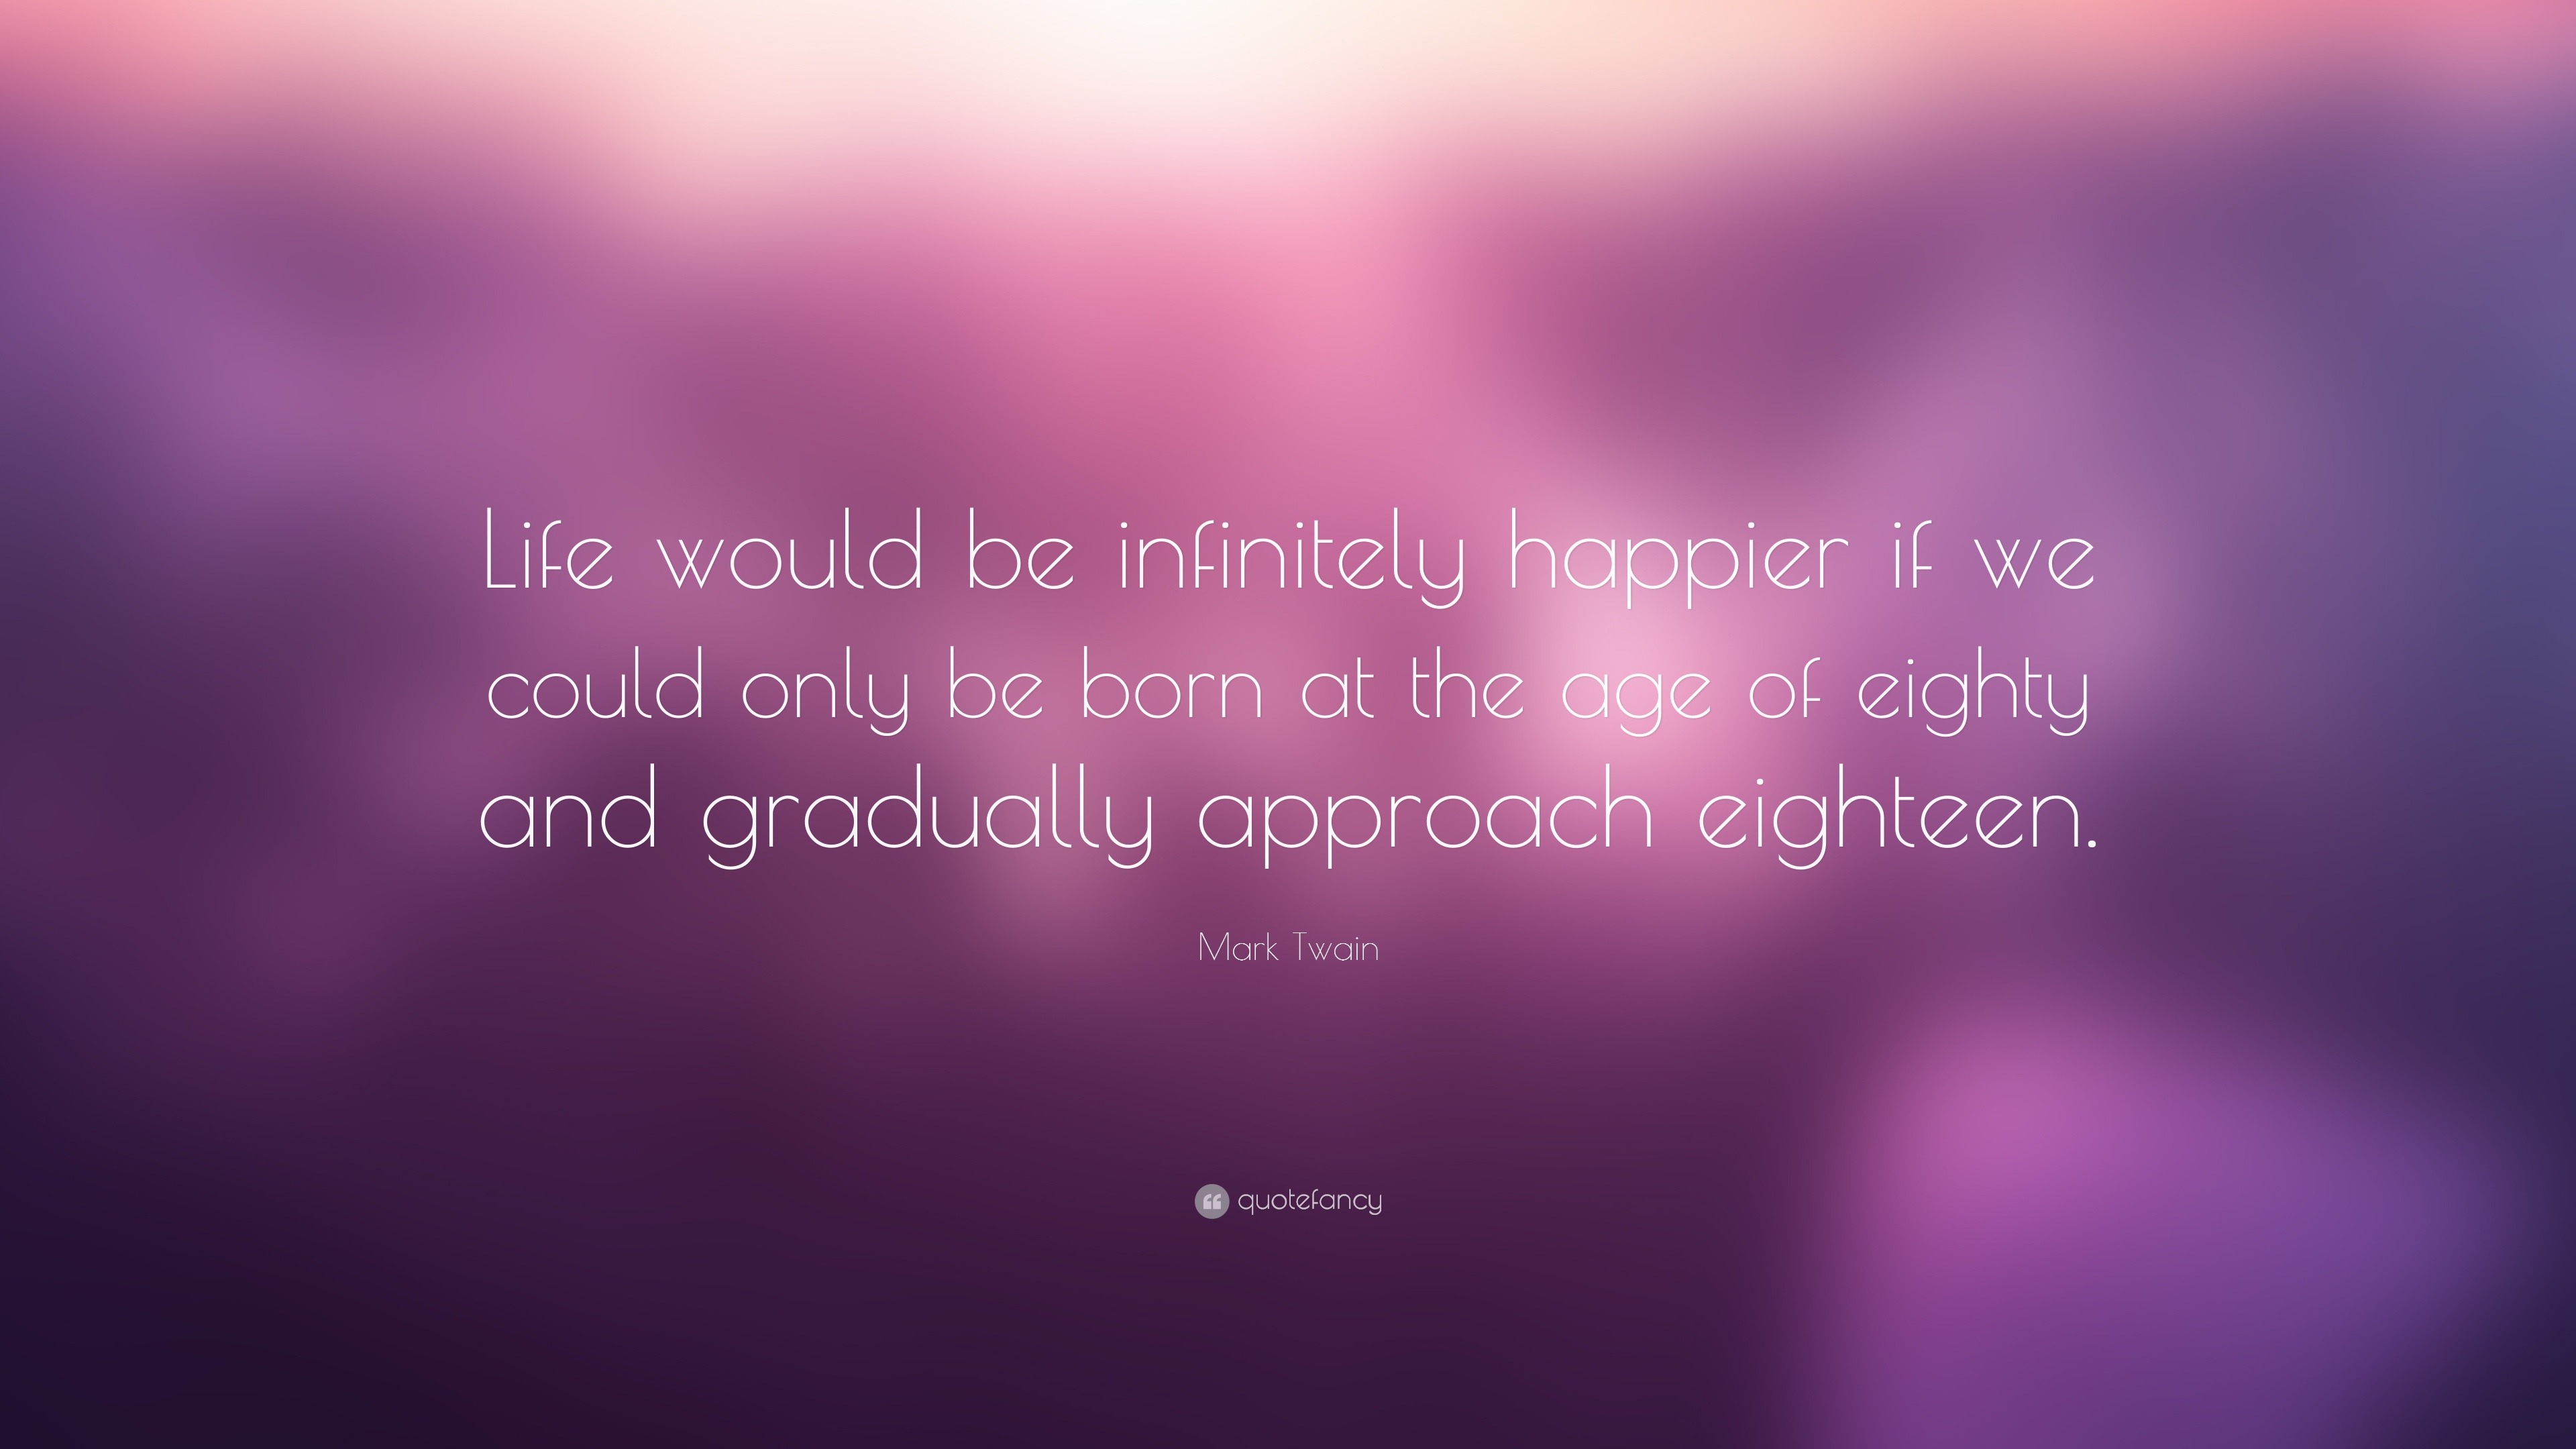 Mark Twain Quote: “Life would be infinitely happier if we could only be ...